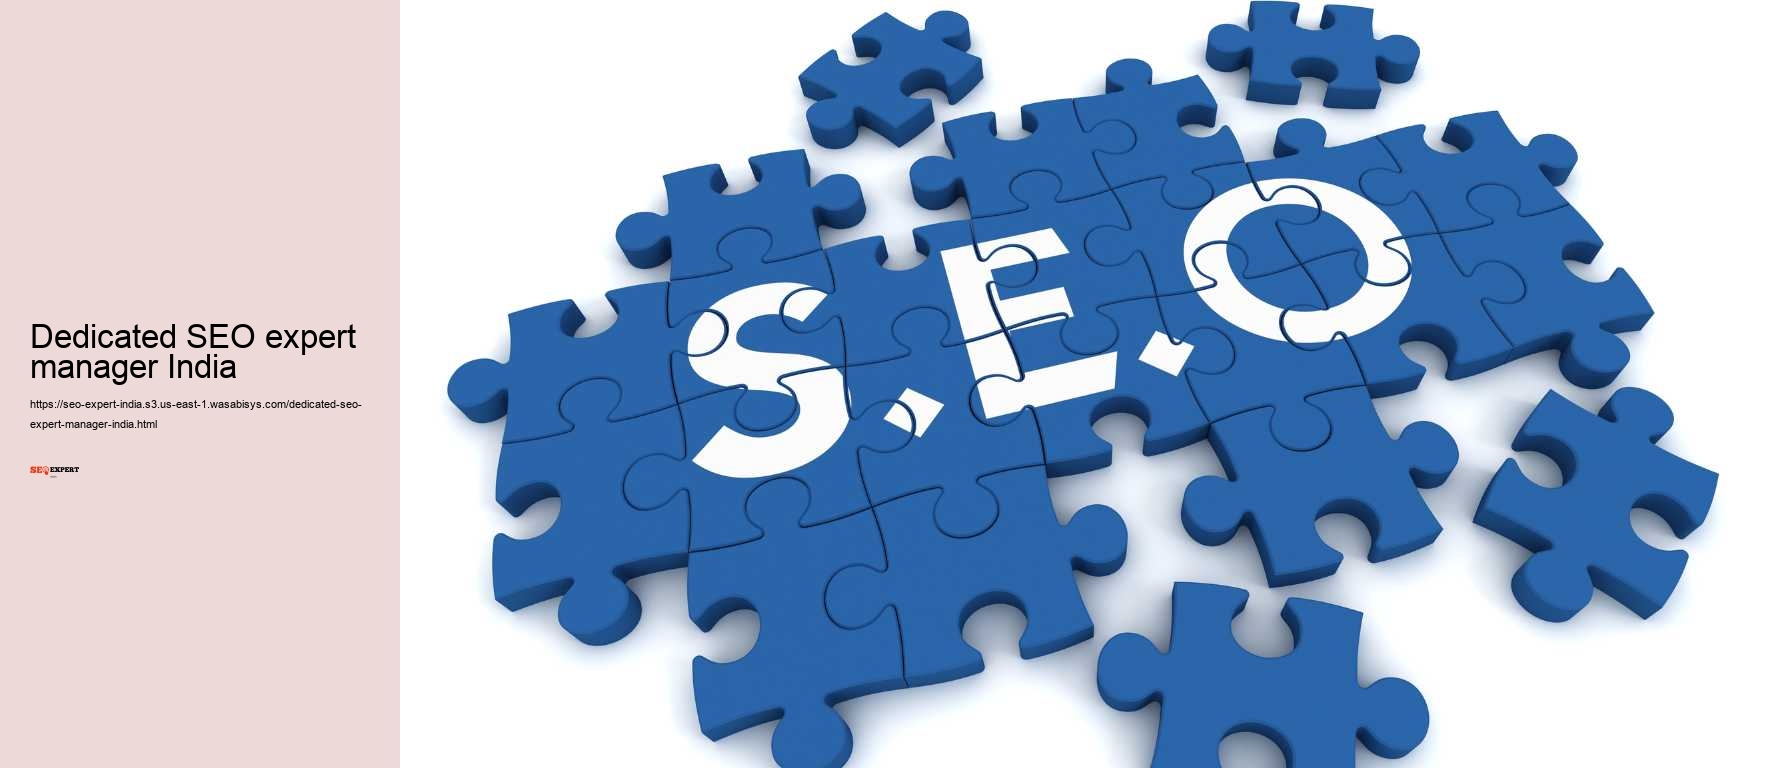 Dedicated SEO expert manager India